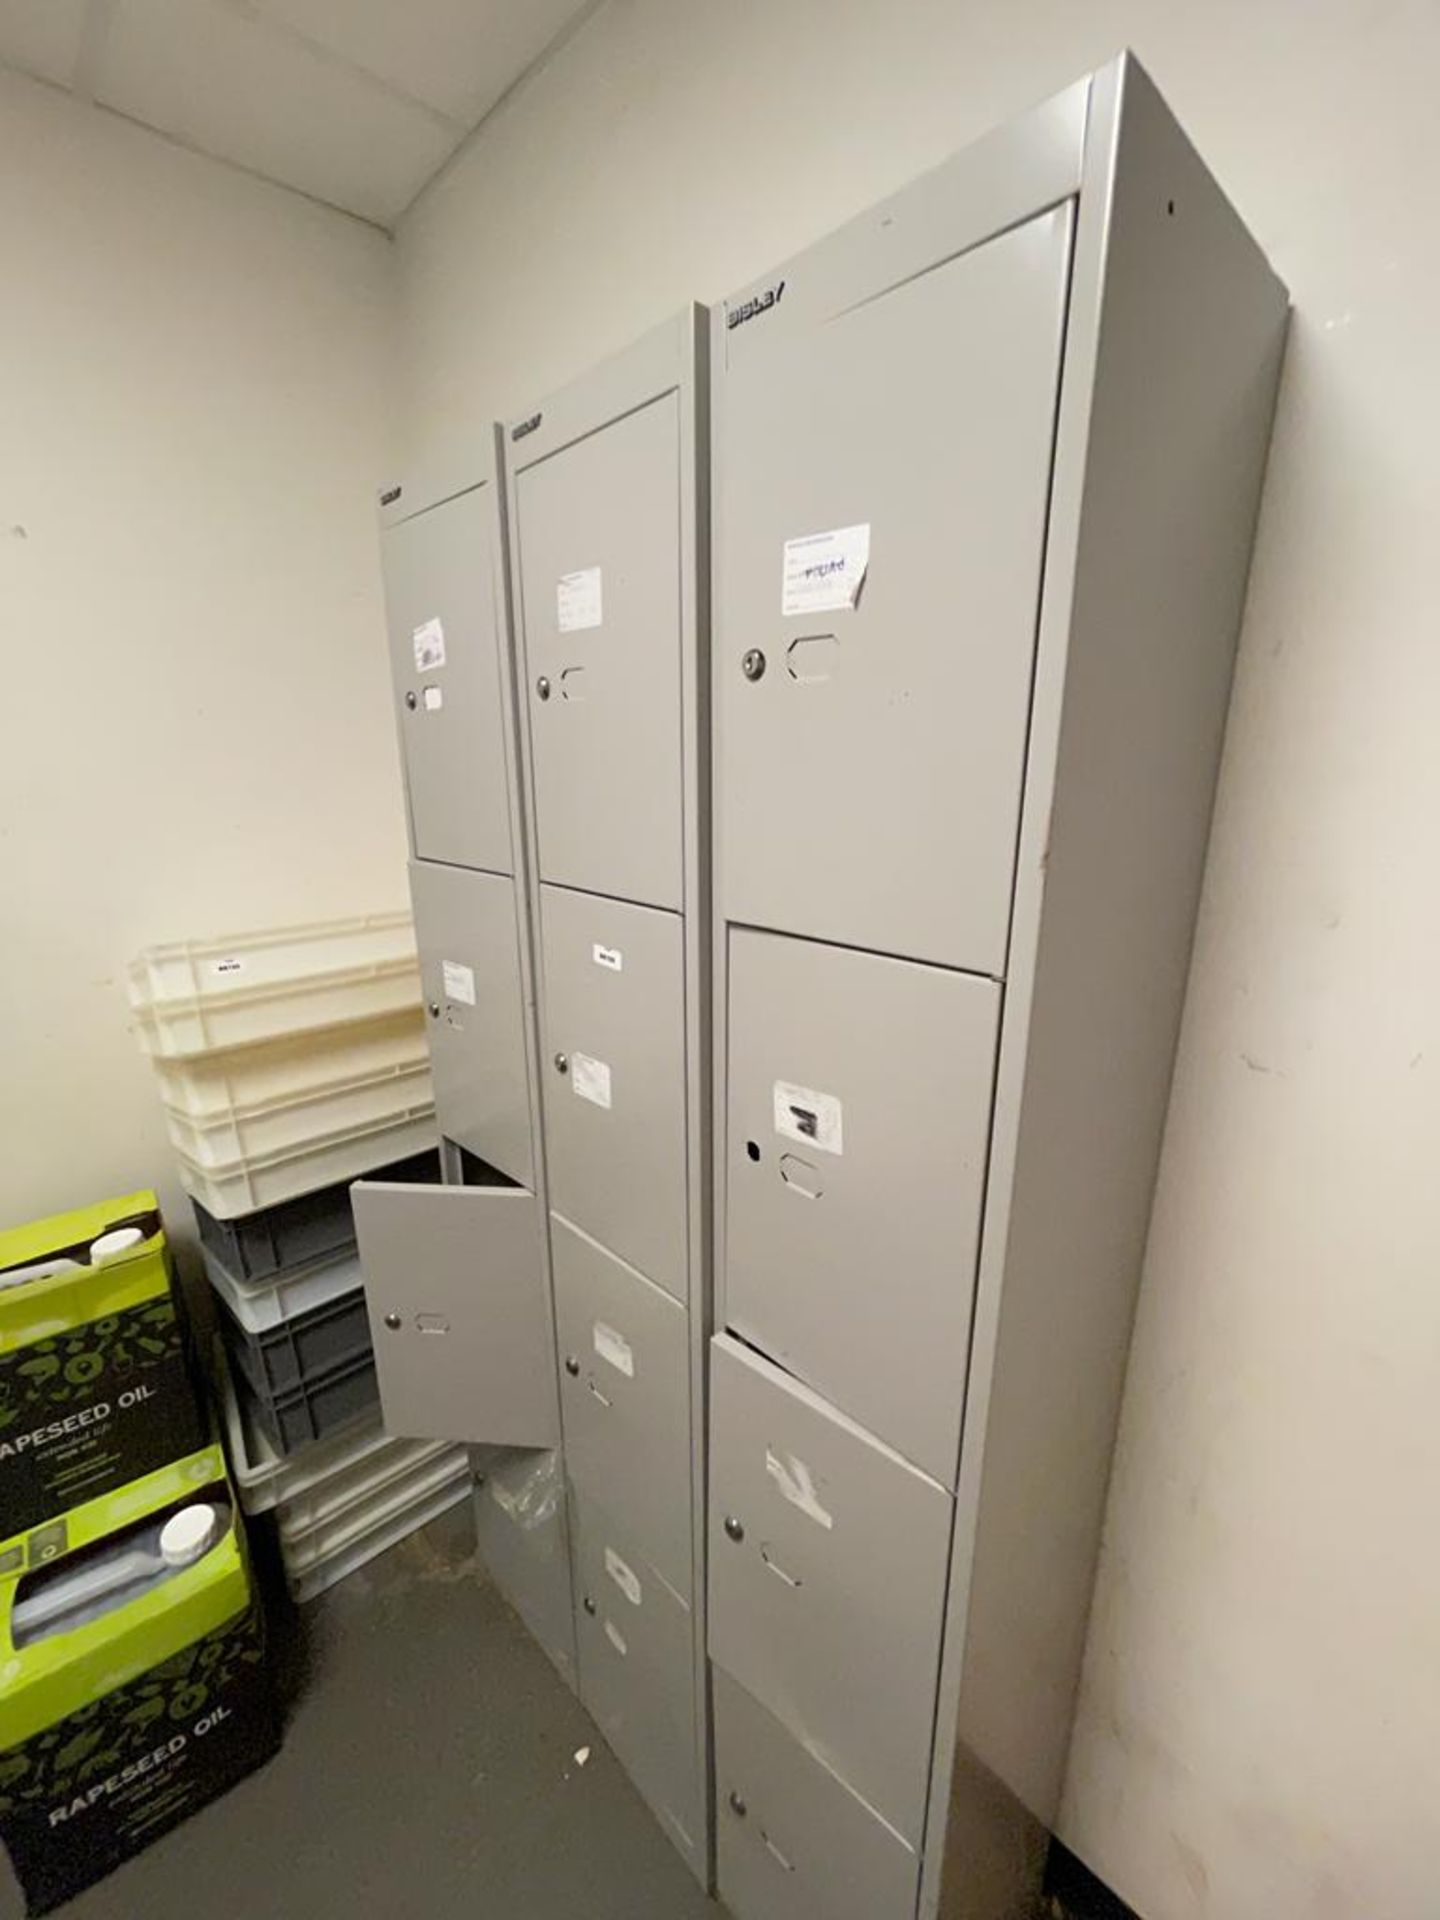 3 x Upright Four Door Staff Lockers - Keys Not Included - Ref: BK196 - CL686 - Location: - Image 4 of 4